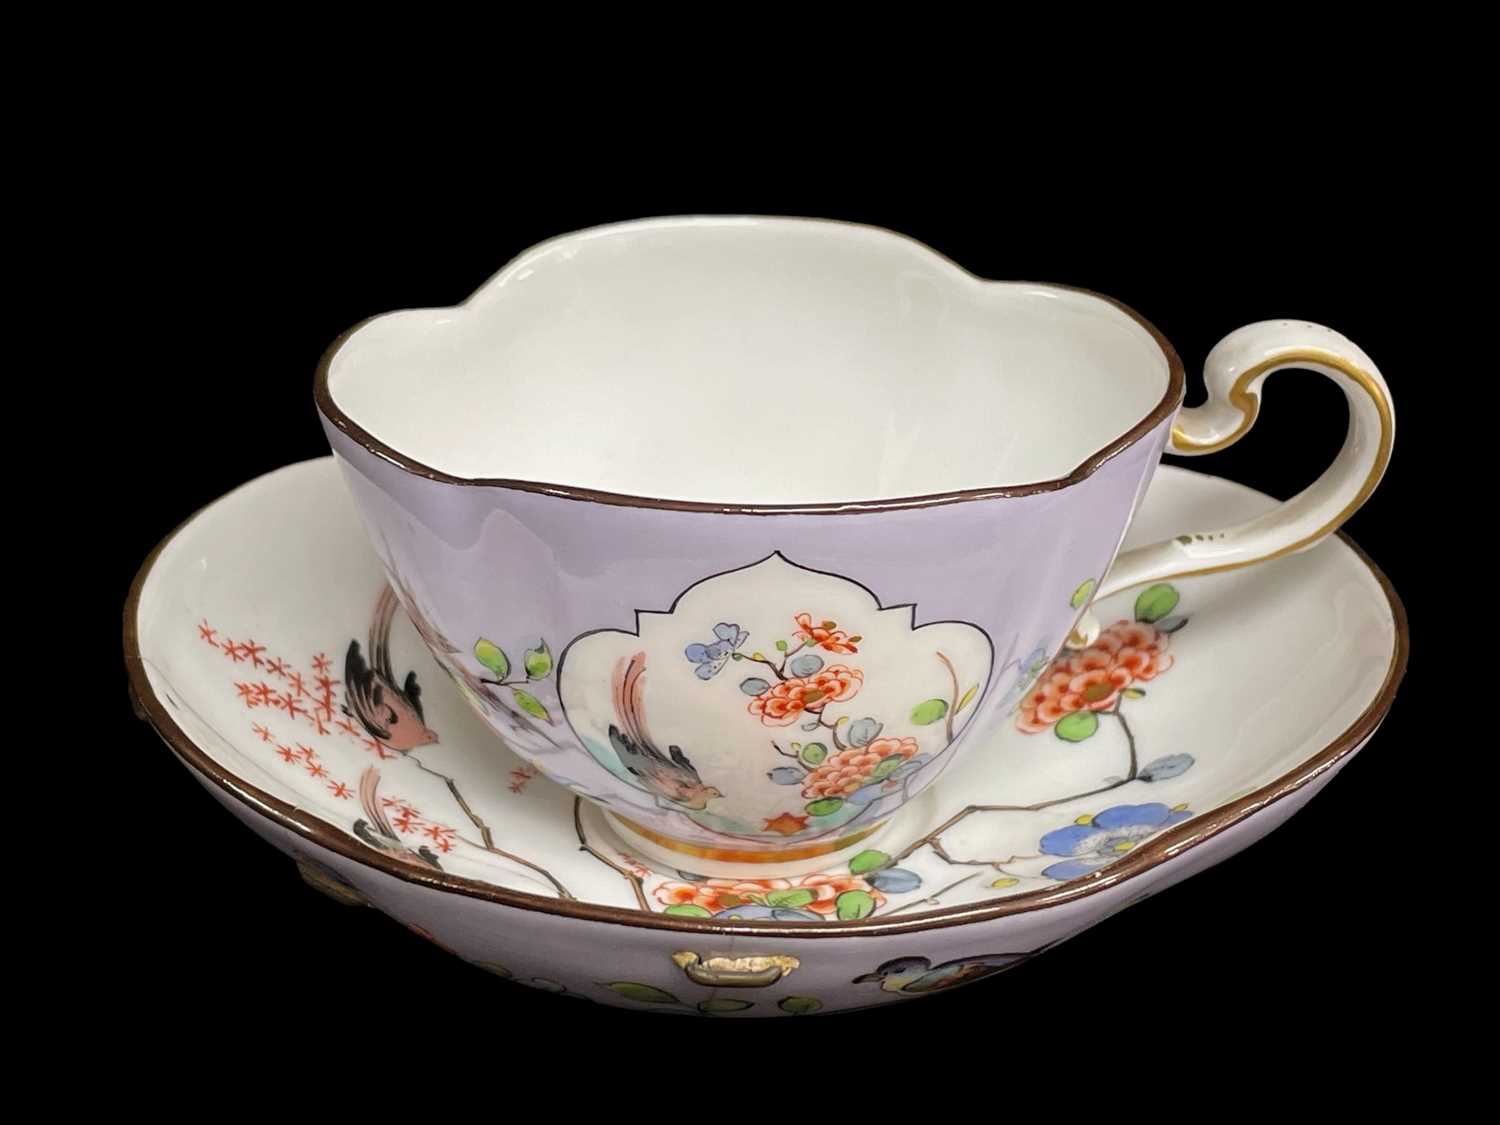 MEISSEN PORCELAIN KAKIEMON-STYLE CUP & SAUCER, quatrefoil shape, painted in the Japanese style - Image 2 of 5